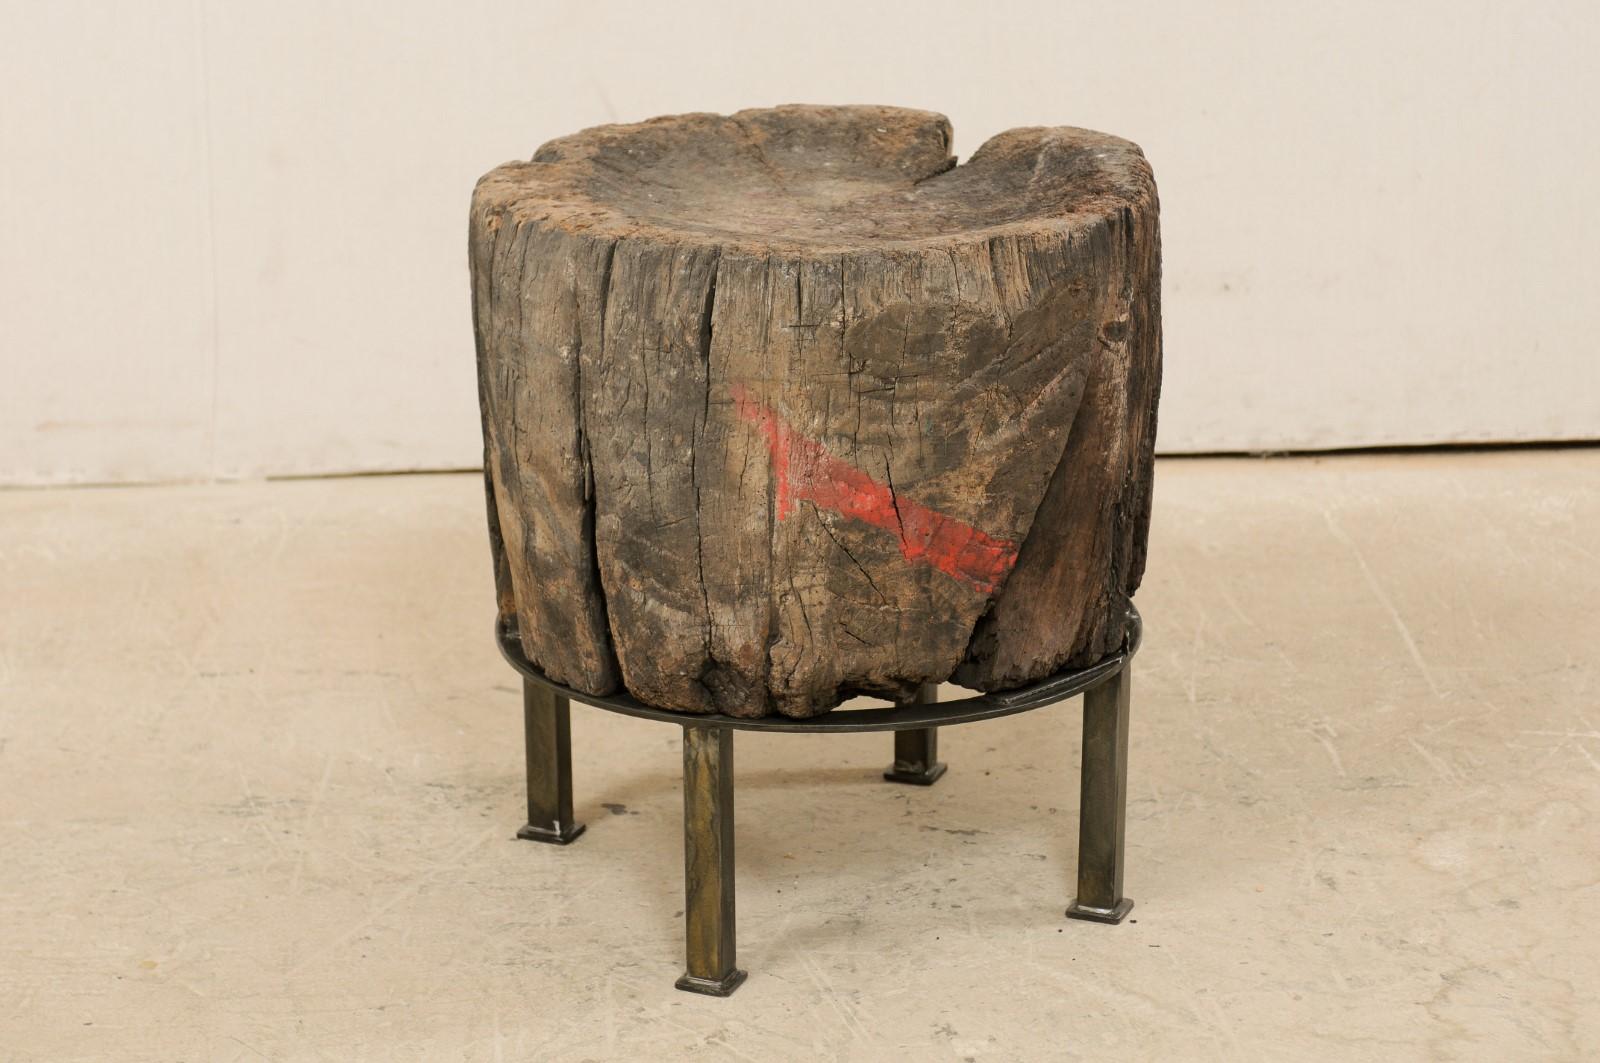 This modern meets old world designed side table has been custom fashioned with a European 19th century chopping block top mounted onto a contemporary iron base. This unique and one-of-a-kind piece has been created with an intriguing mix of rustic